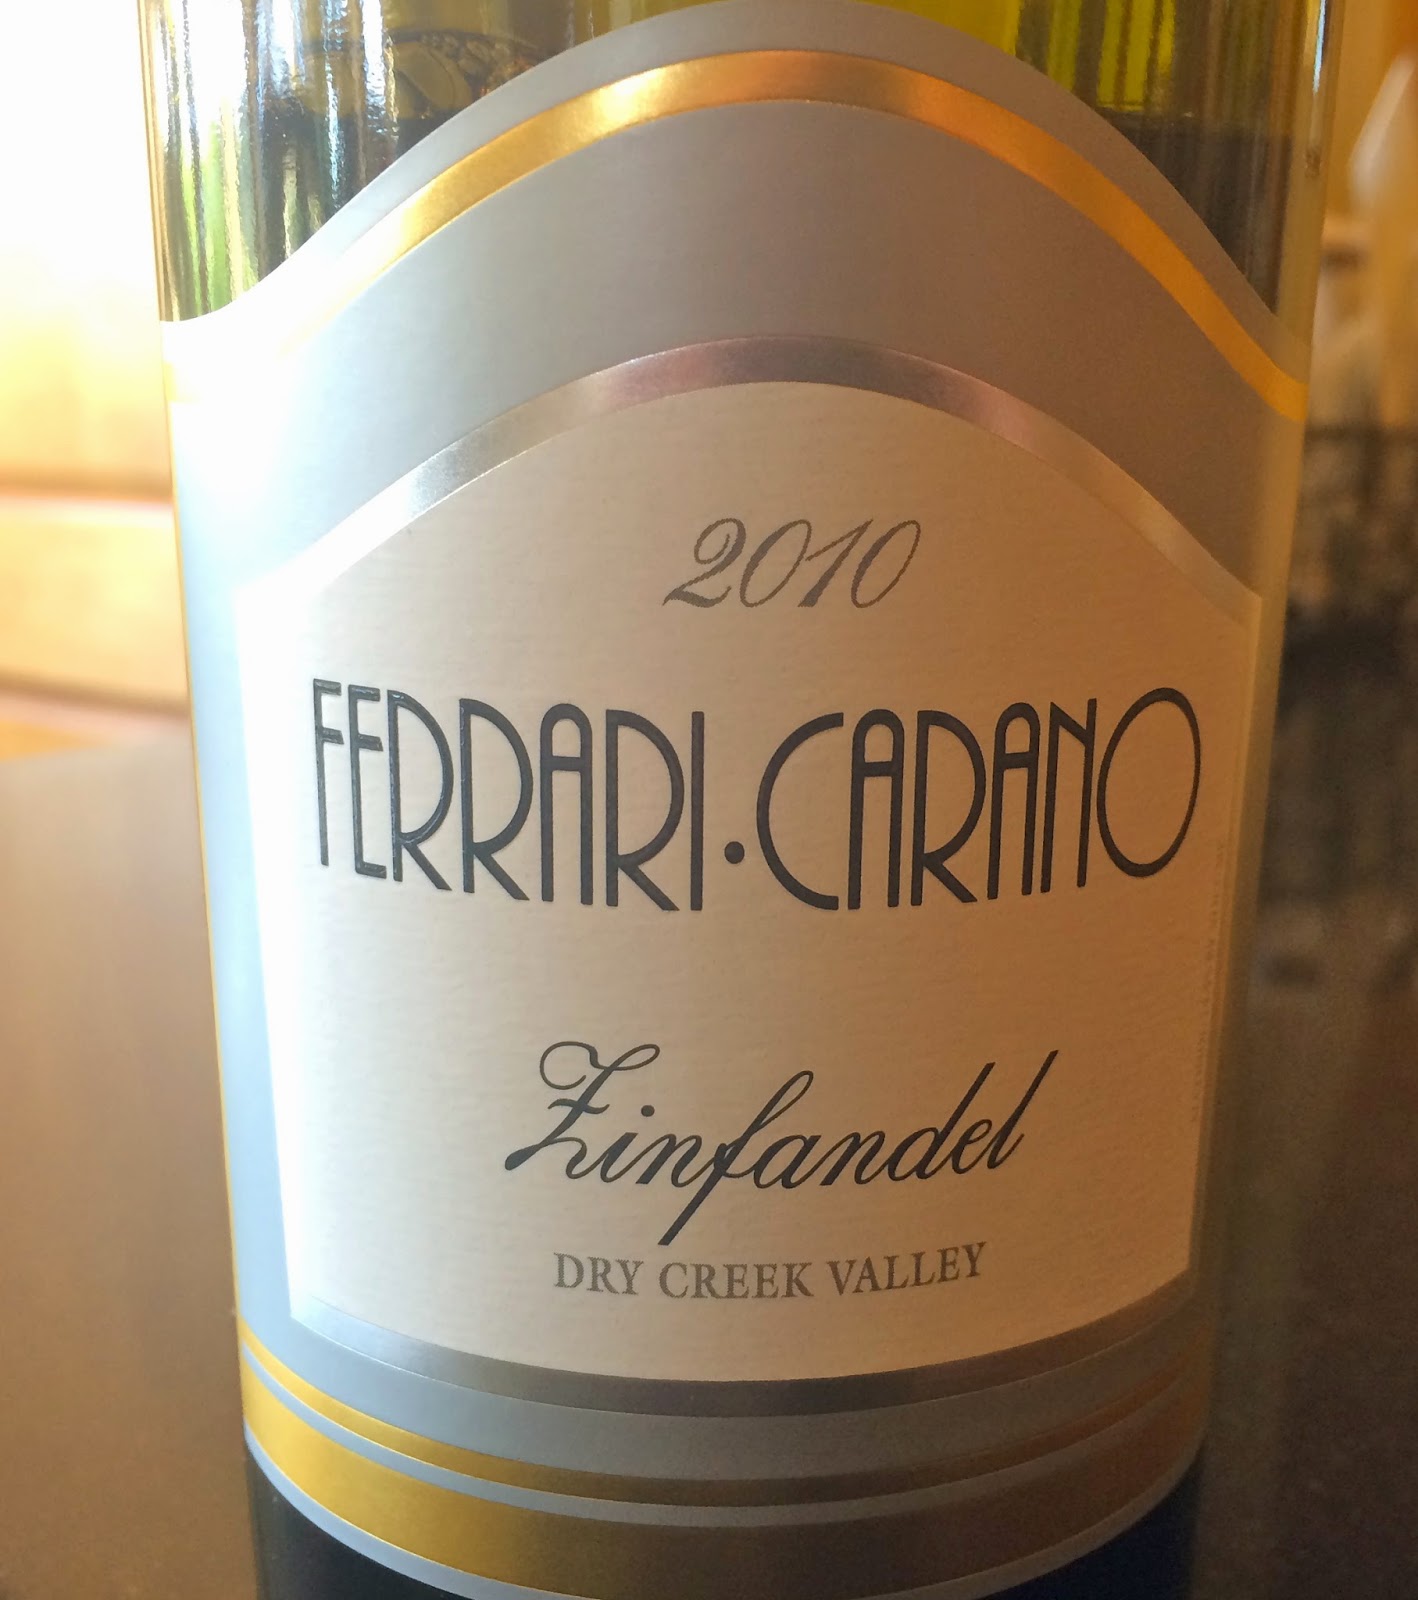 Spaswinefood The Not To Be Missed Ferrari Carano Vineyards And Winery